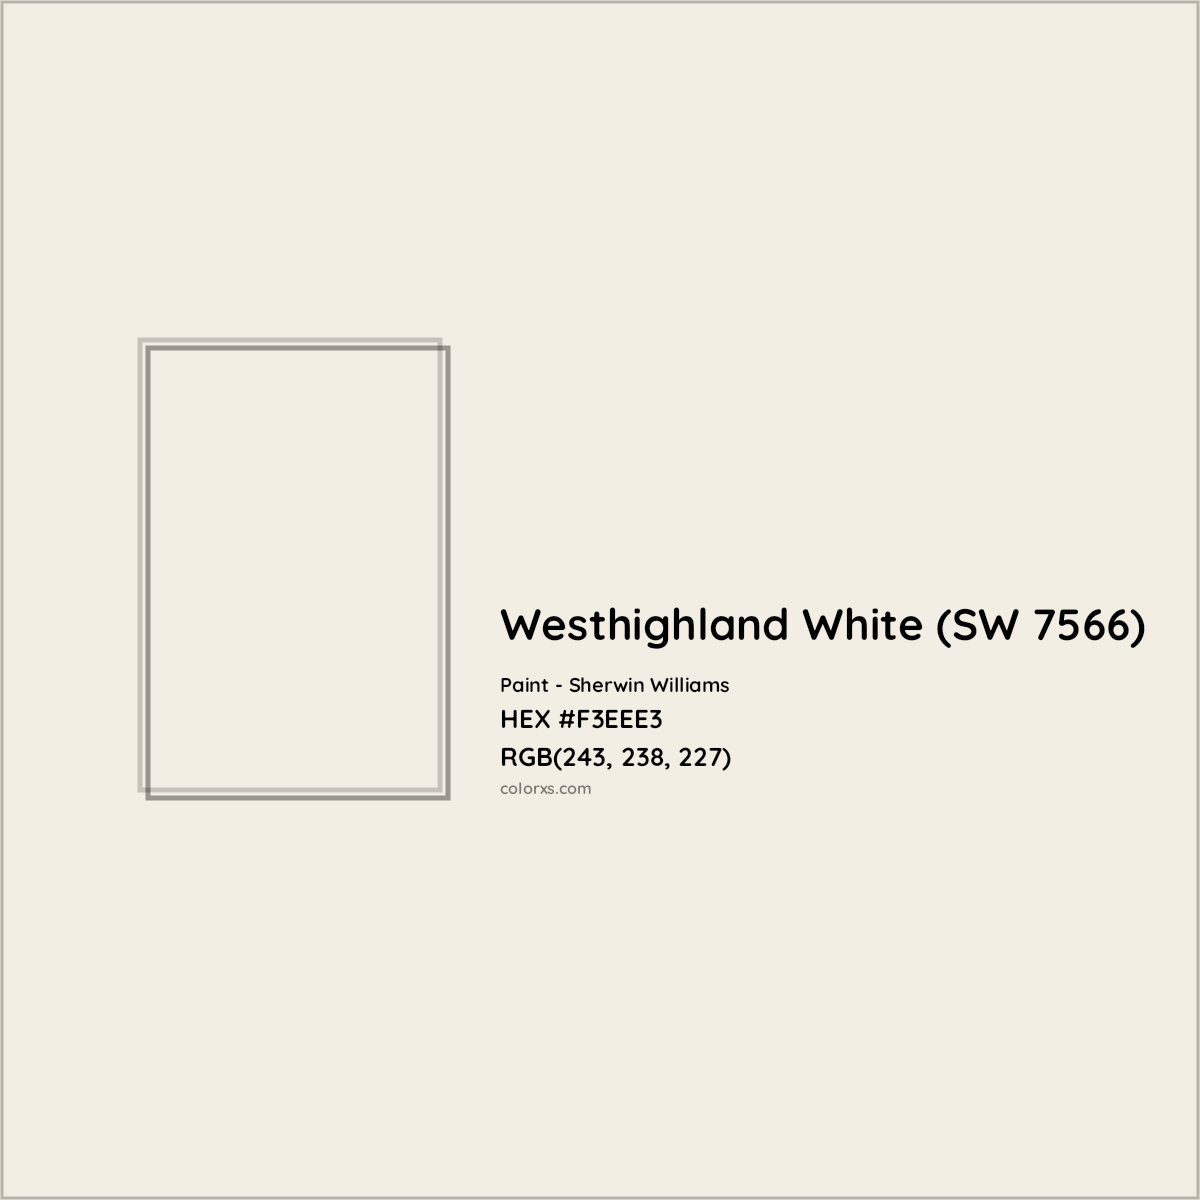 HEX #F3EEE3 Westhighland White (SW 7566) Paint Sherwin Williams - Color Code